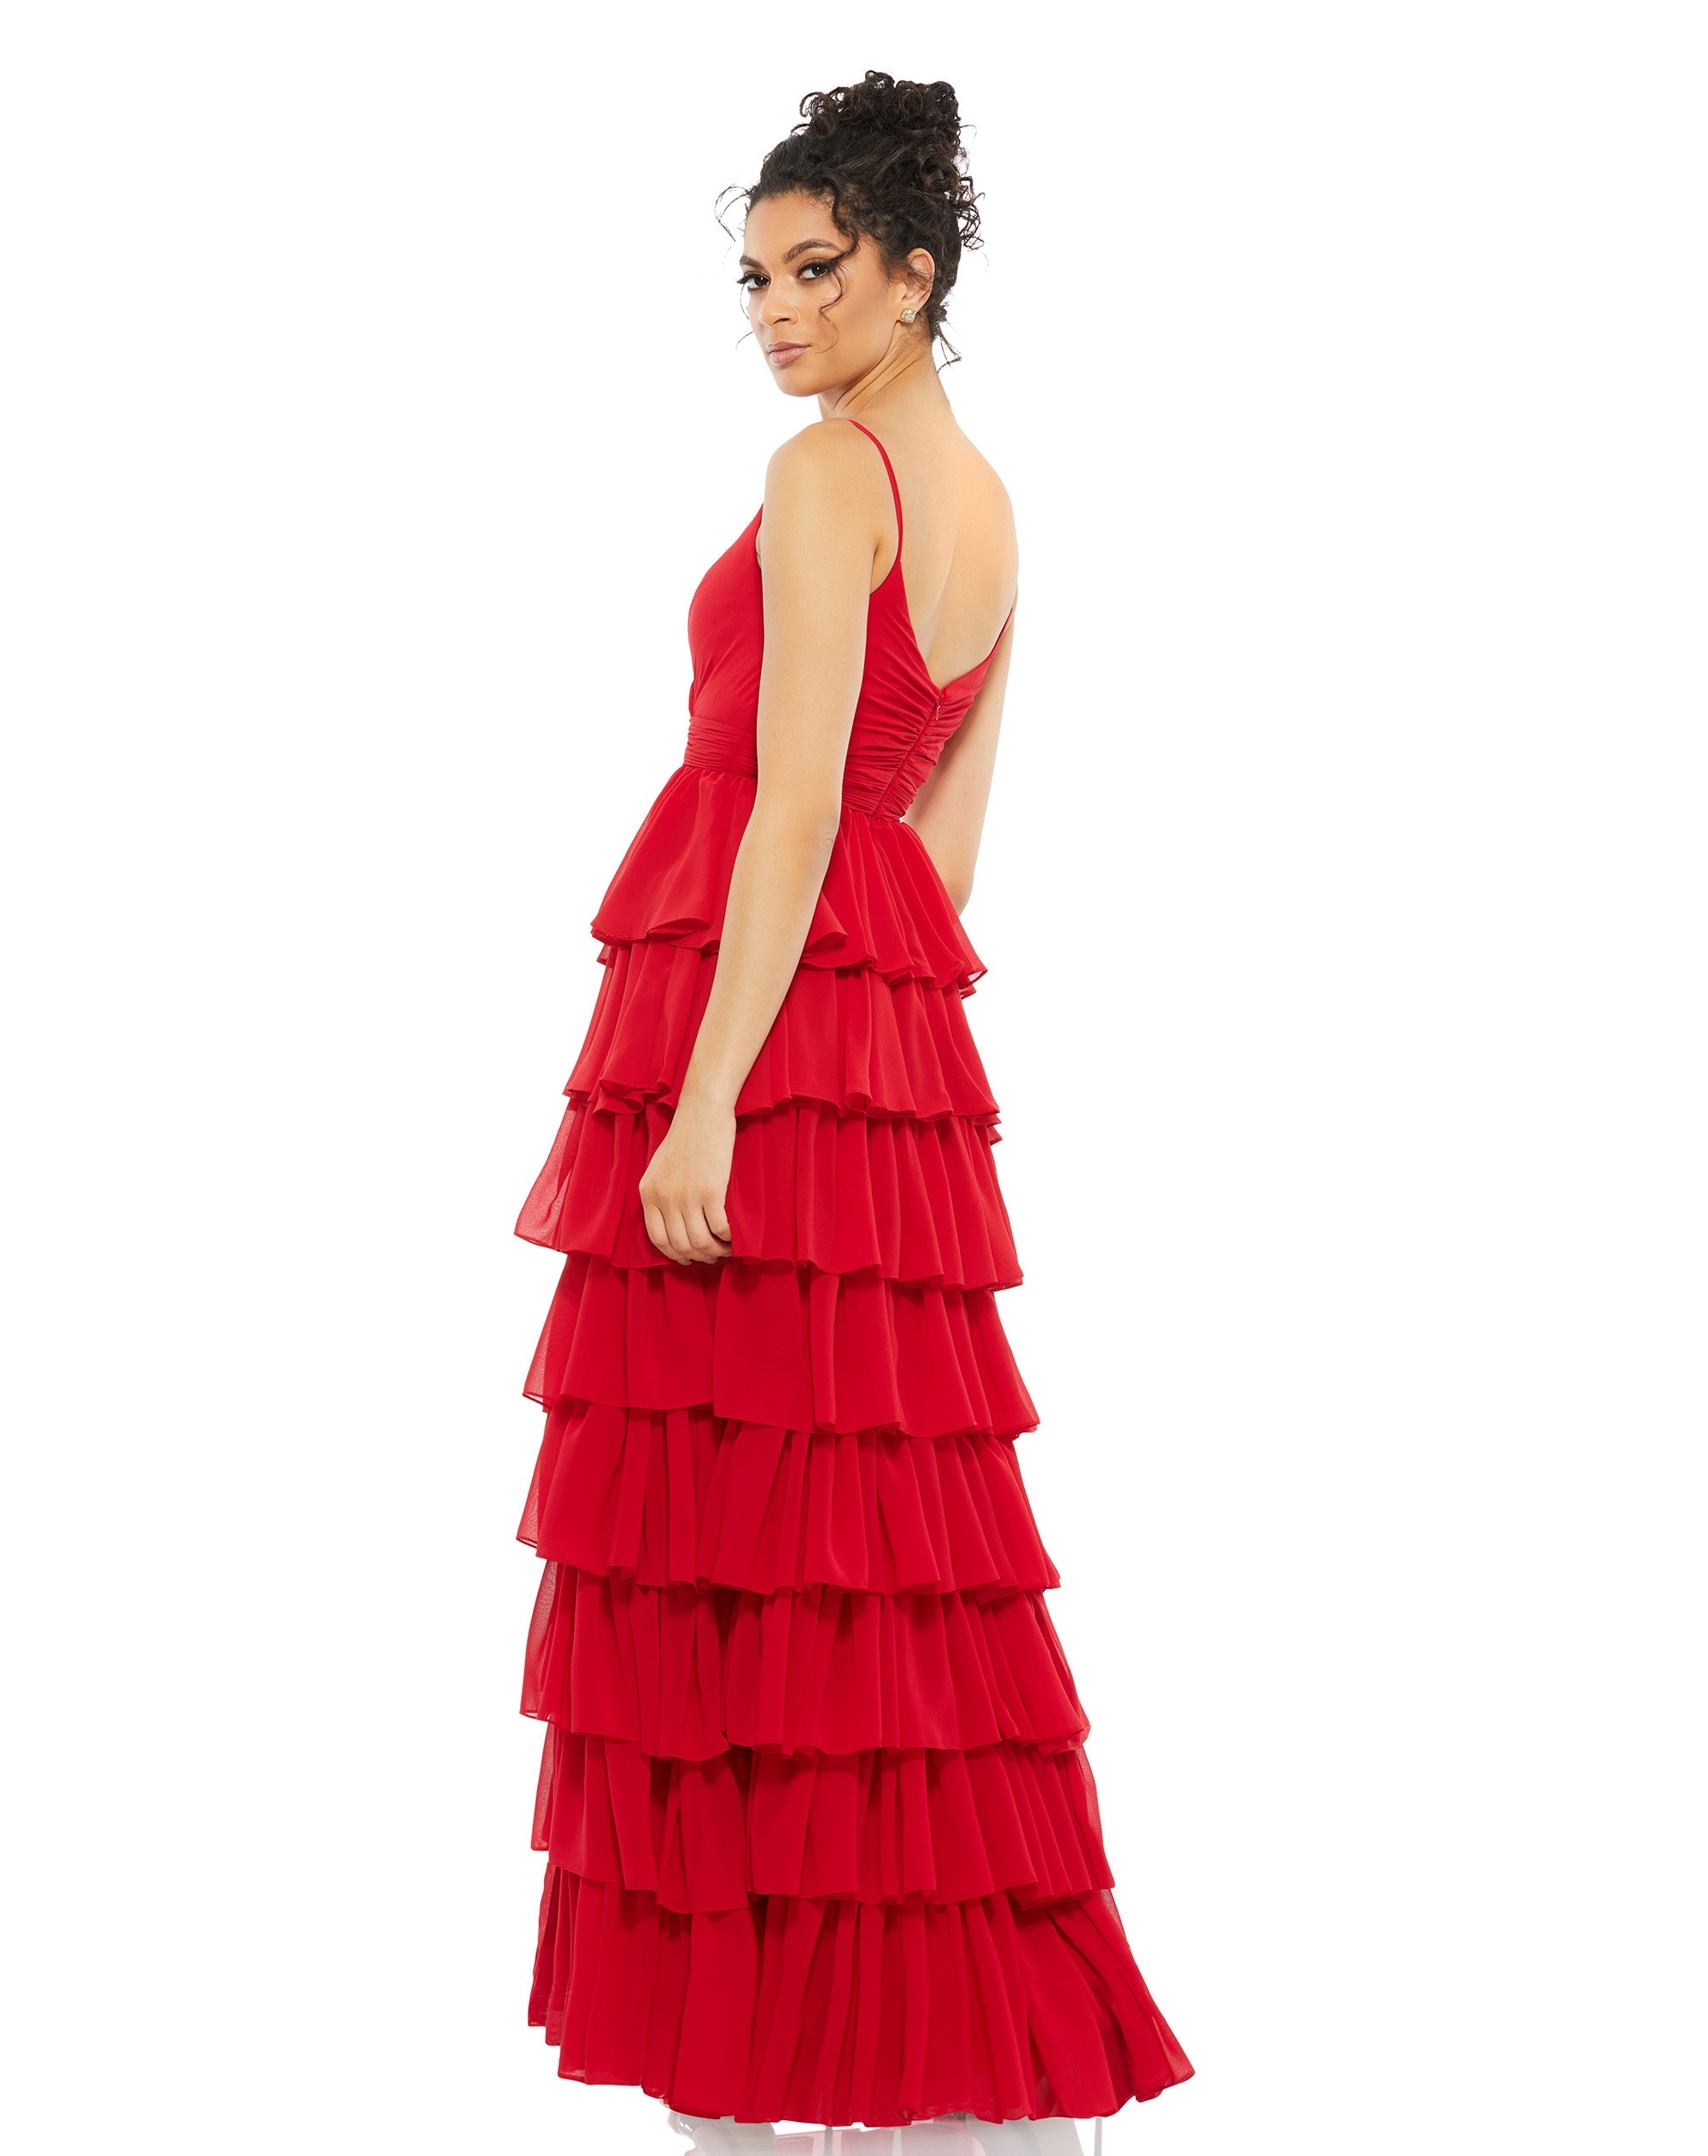 Sleeveless Gown with Ruffled Skirt